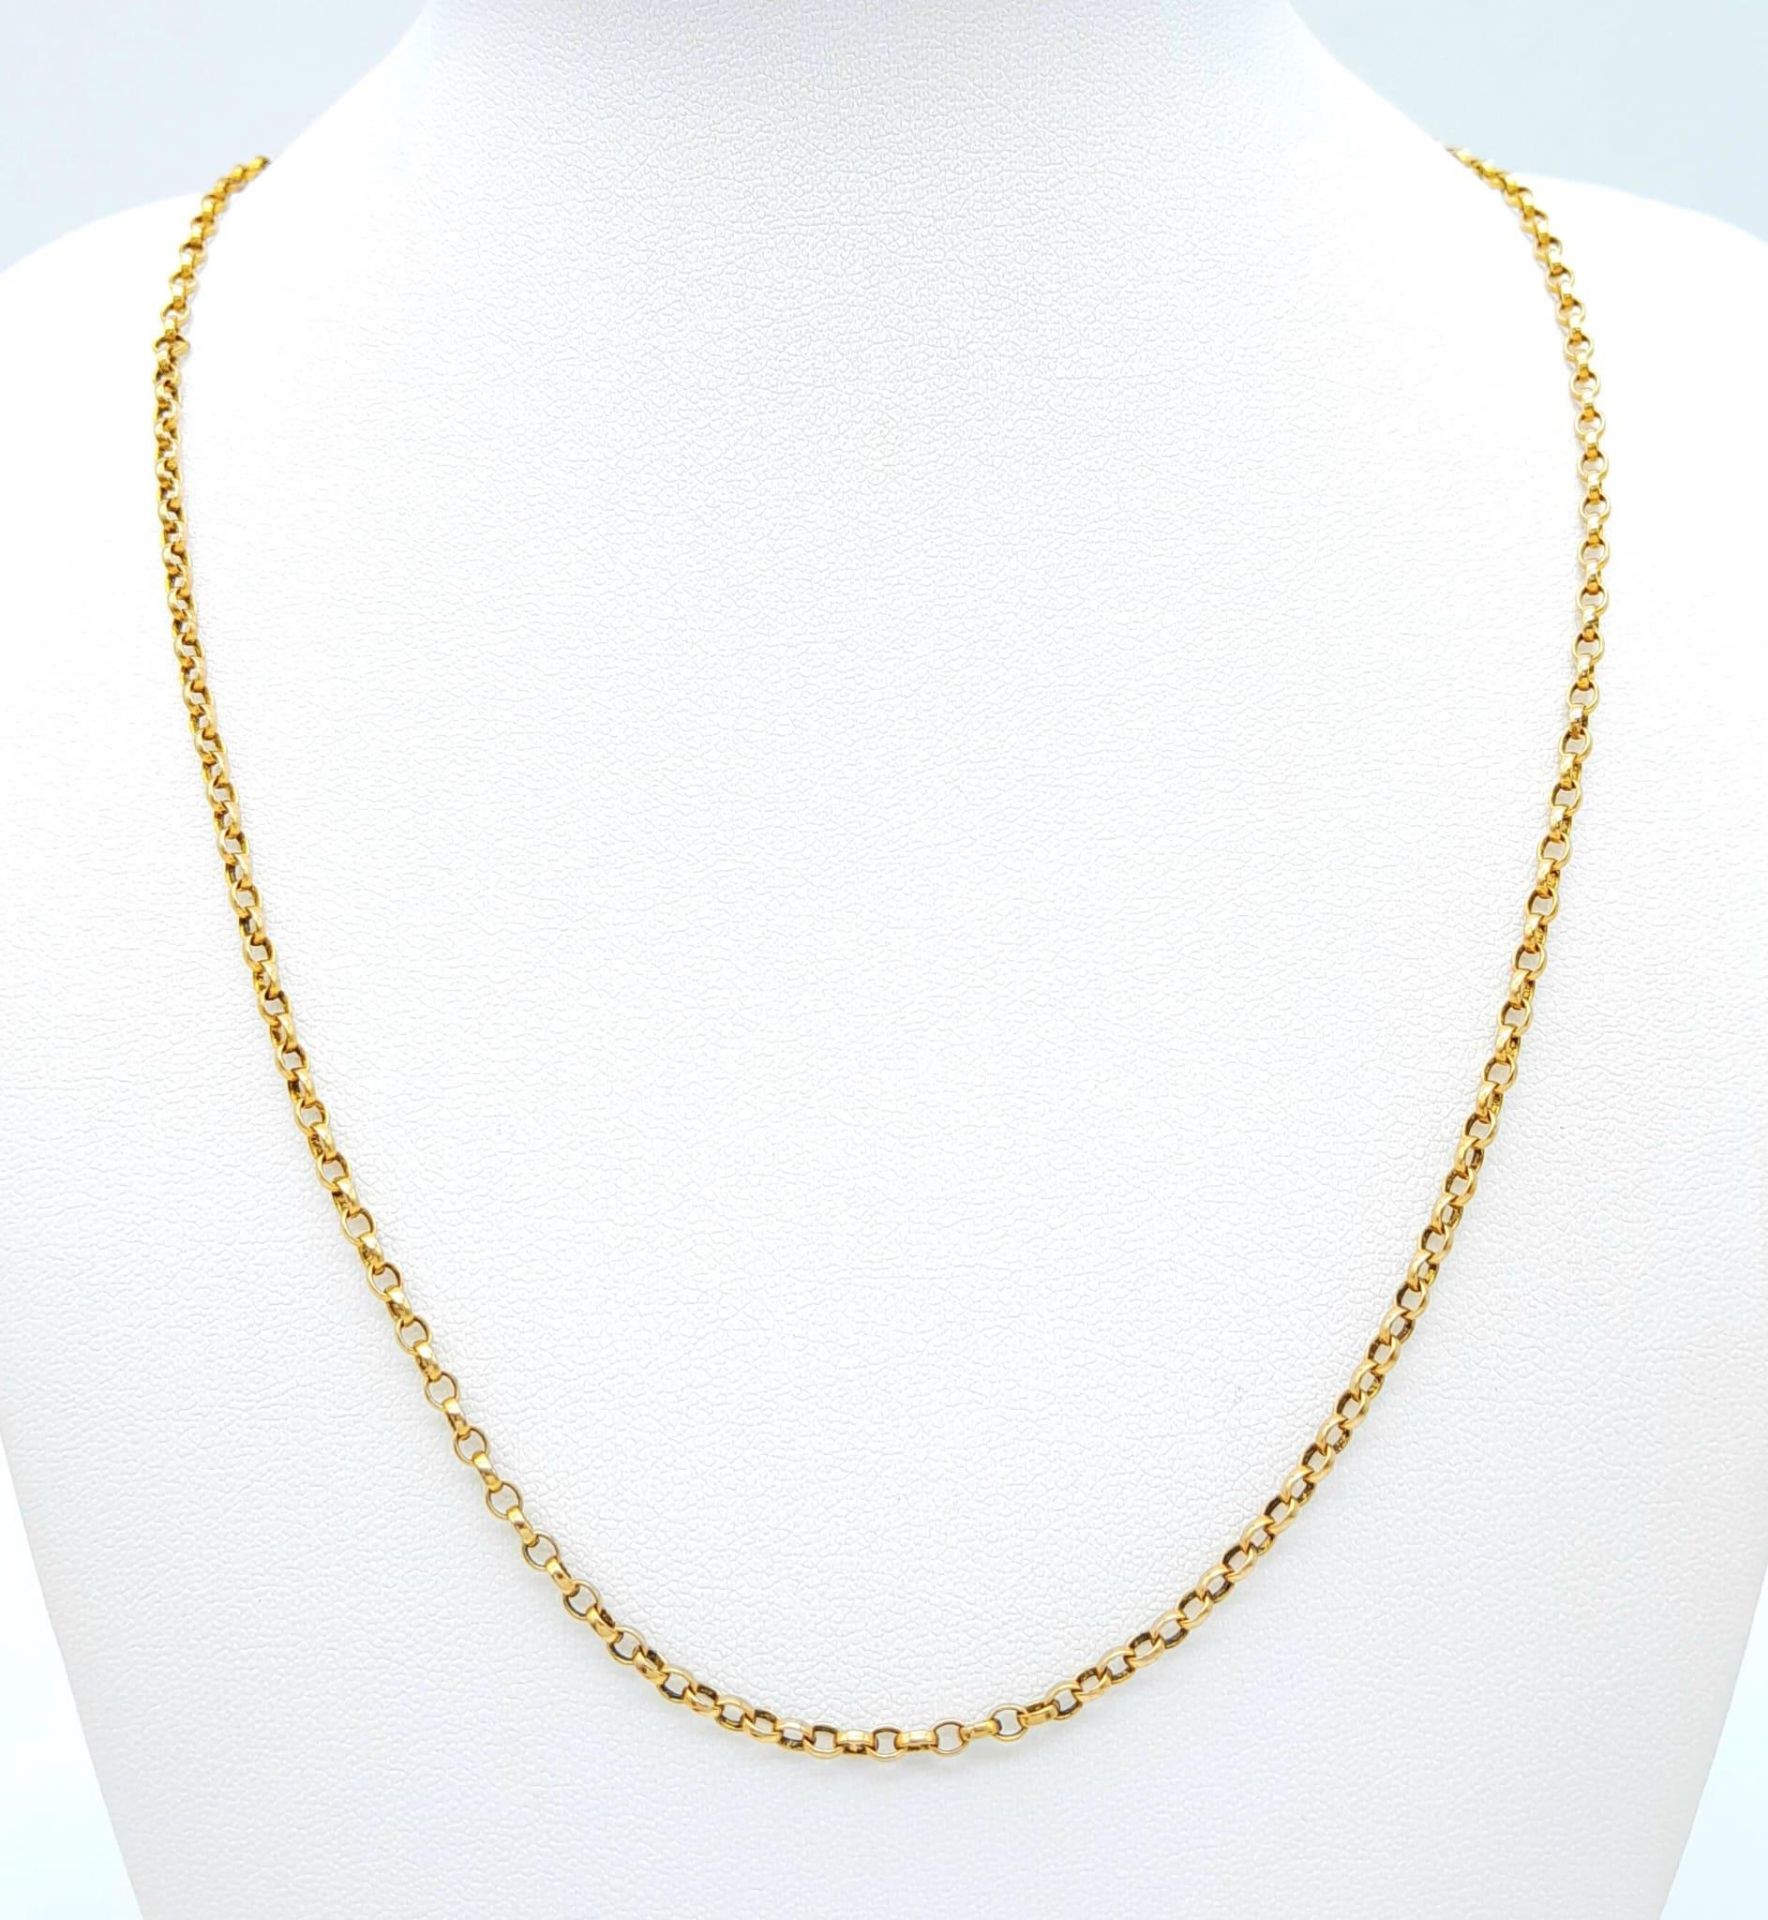 A 9 K yellow gold chain necklace, length: 56 cm, weight: 7.2 g.